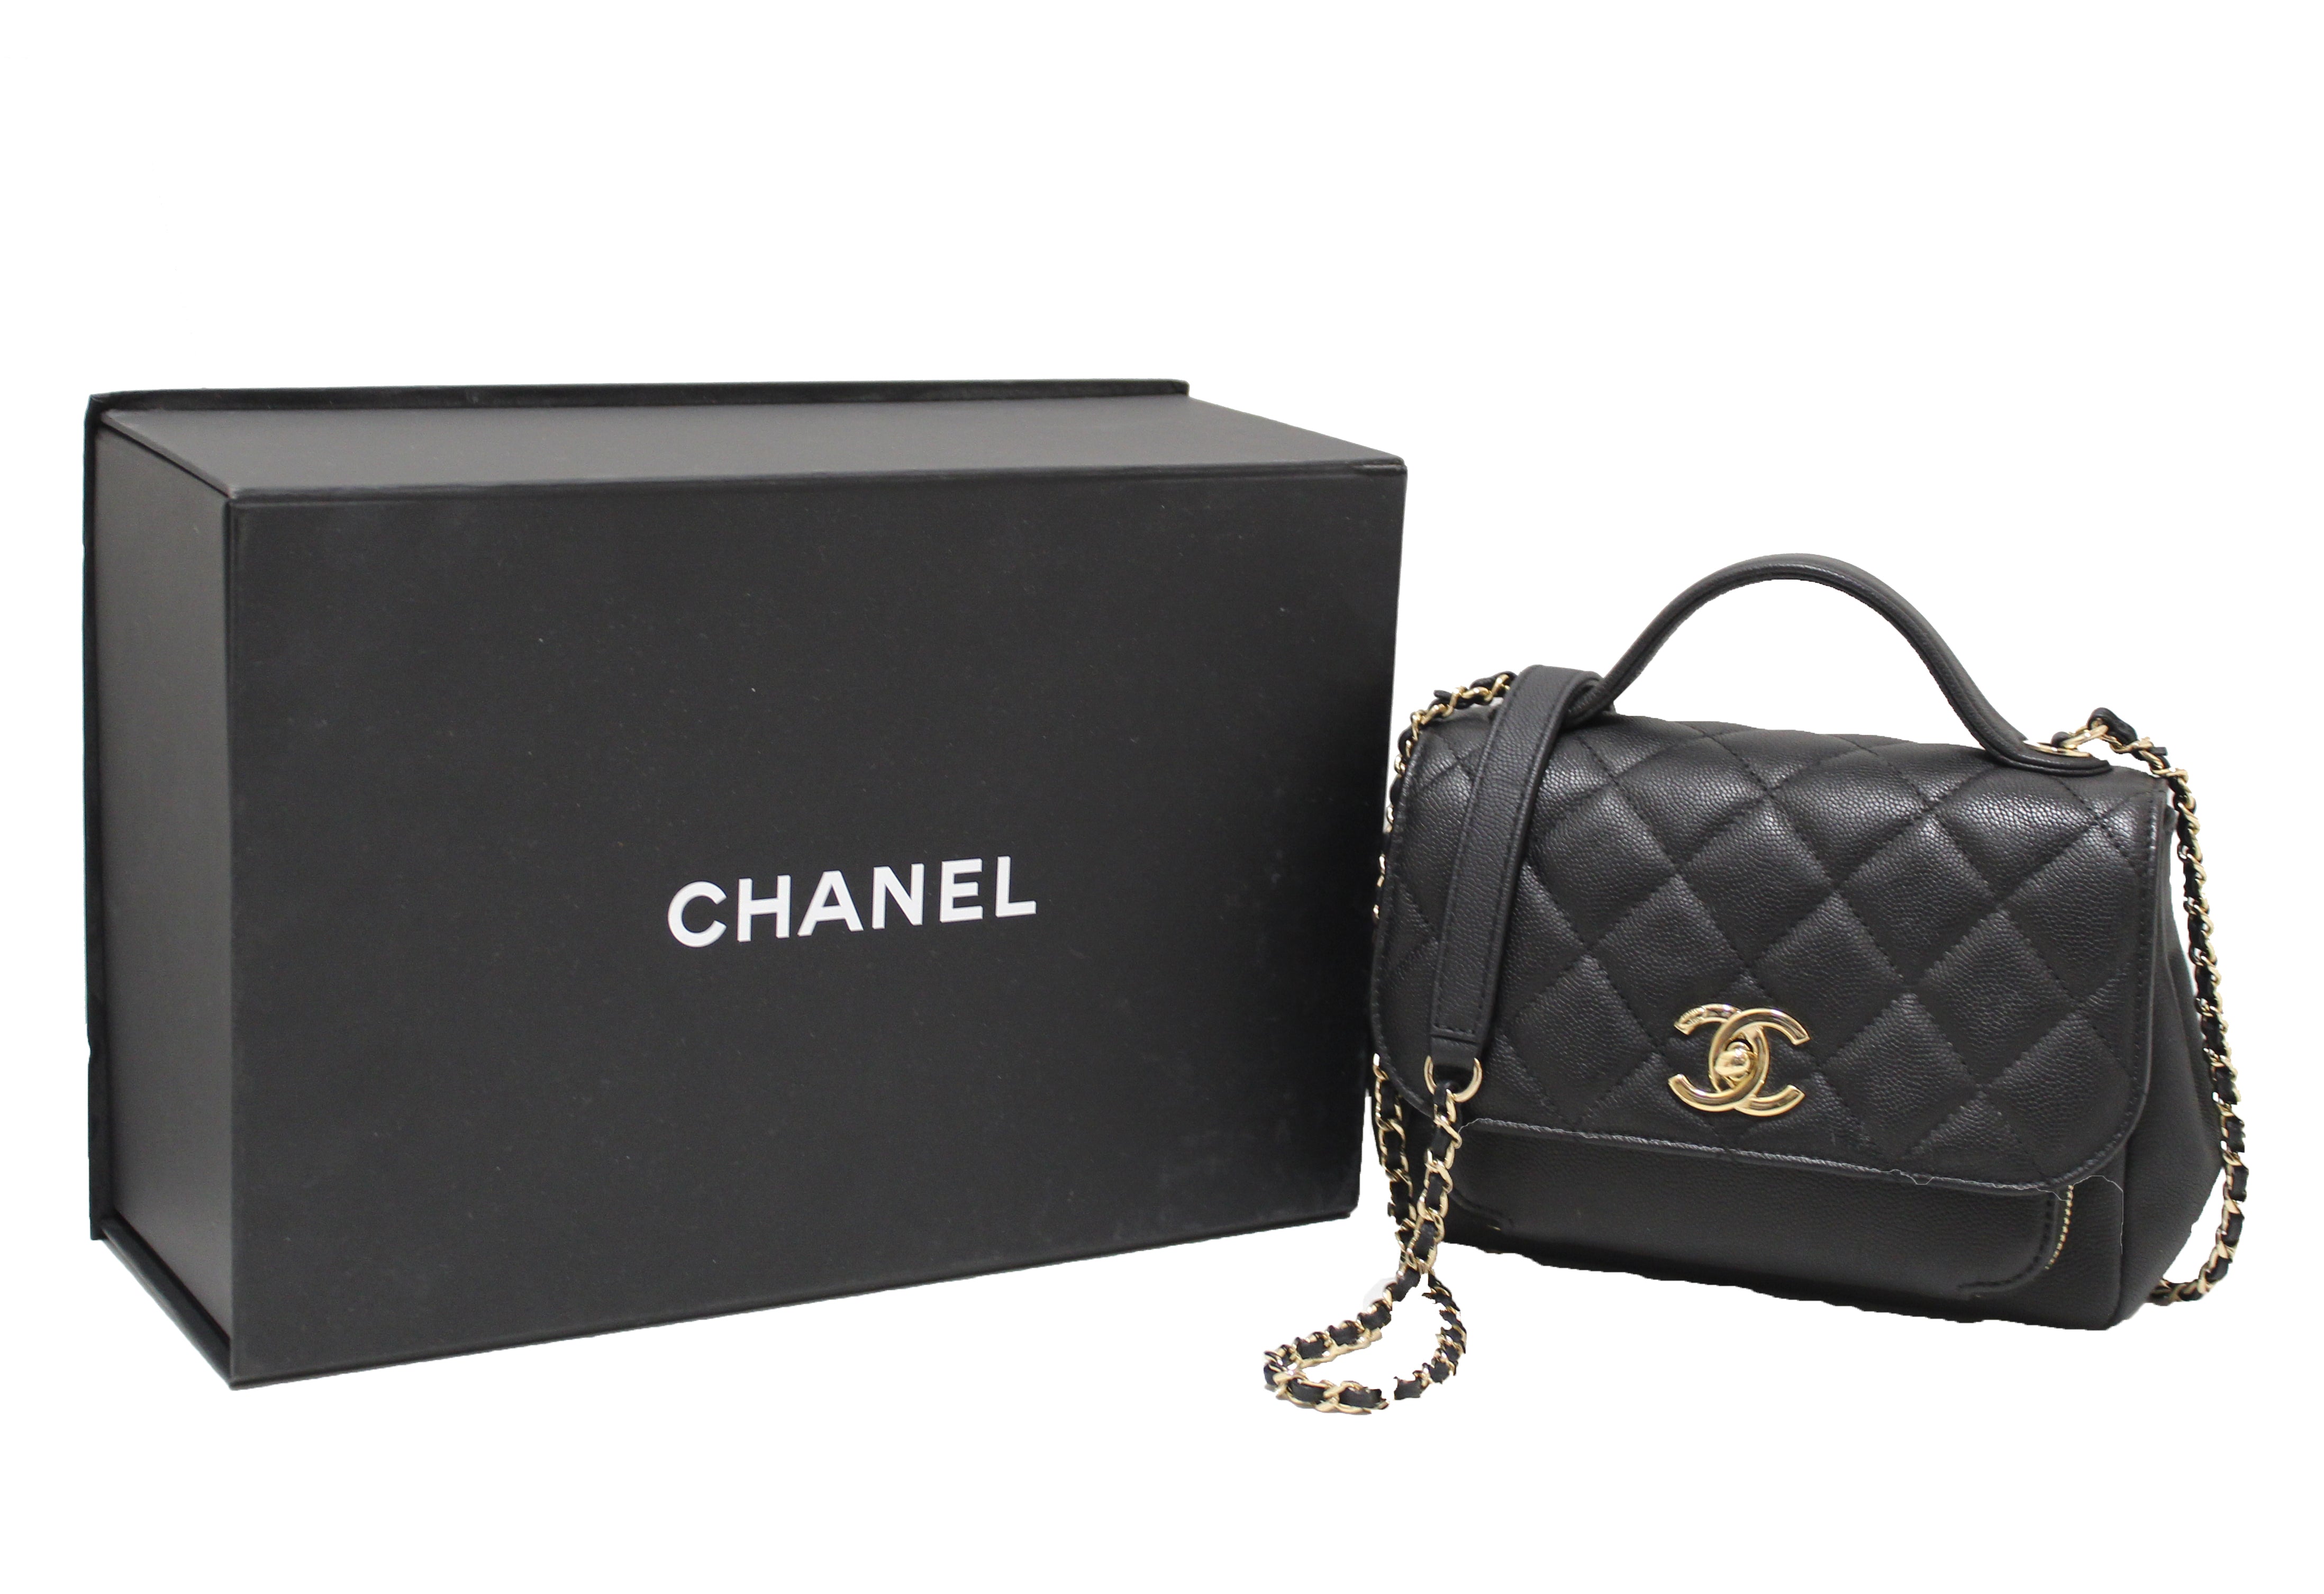 Business affinity leather handbag Chanel Black in Leather - 31302459